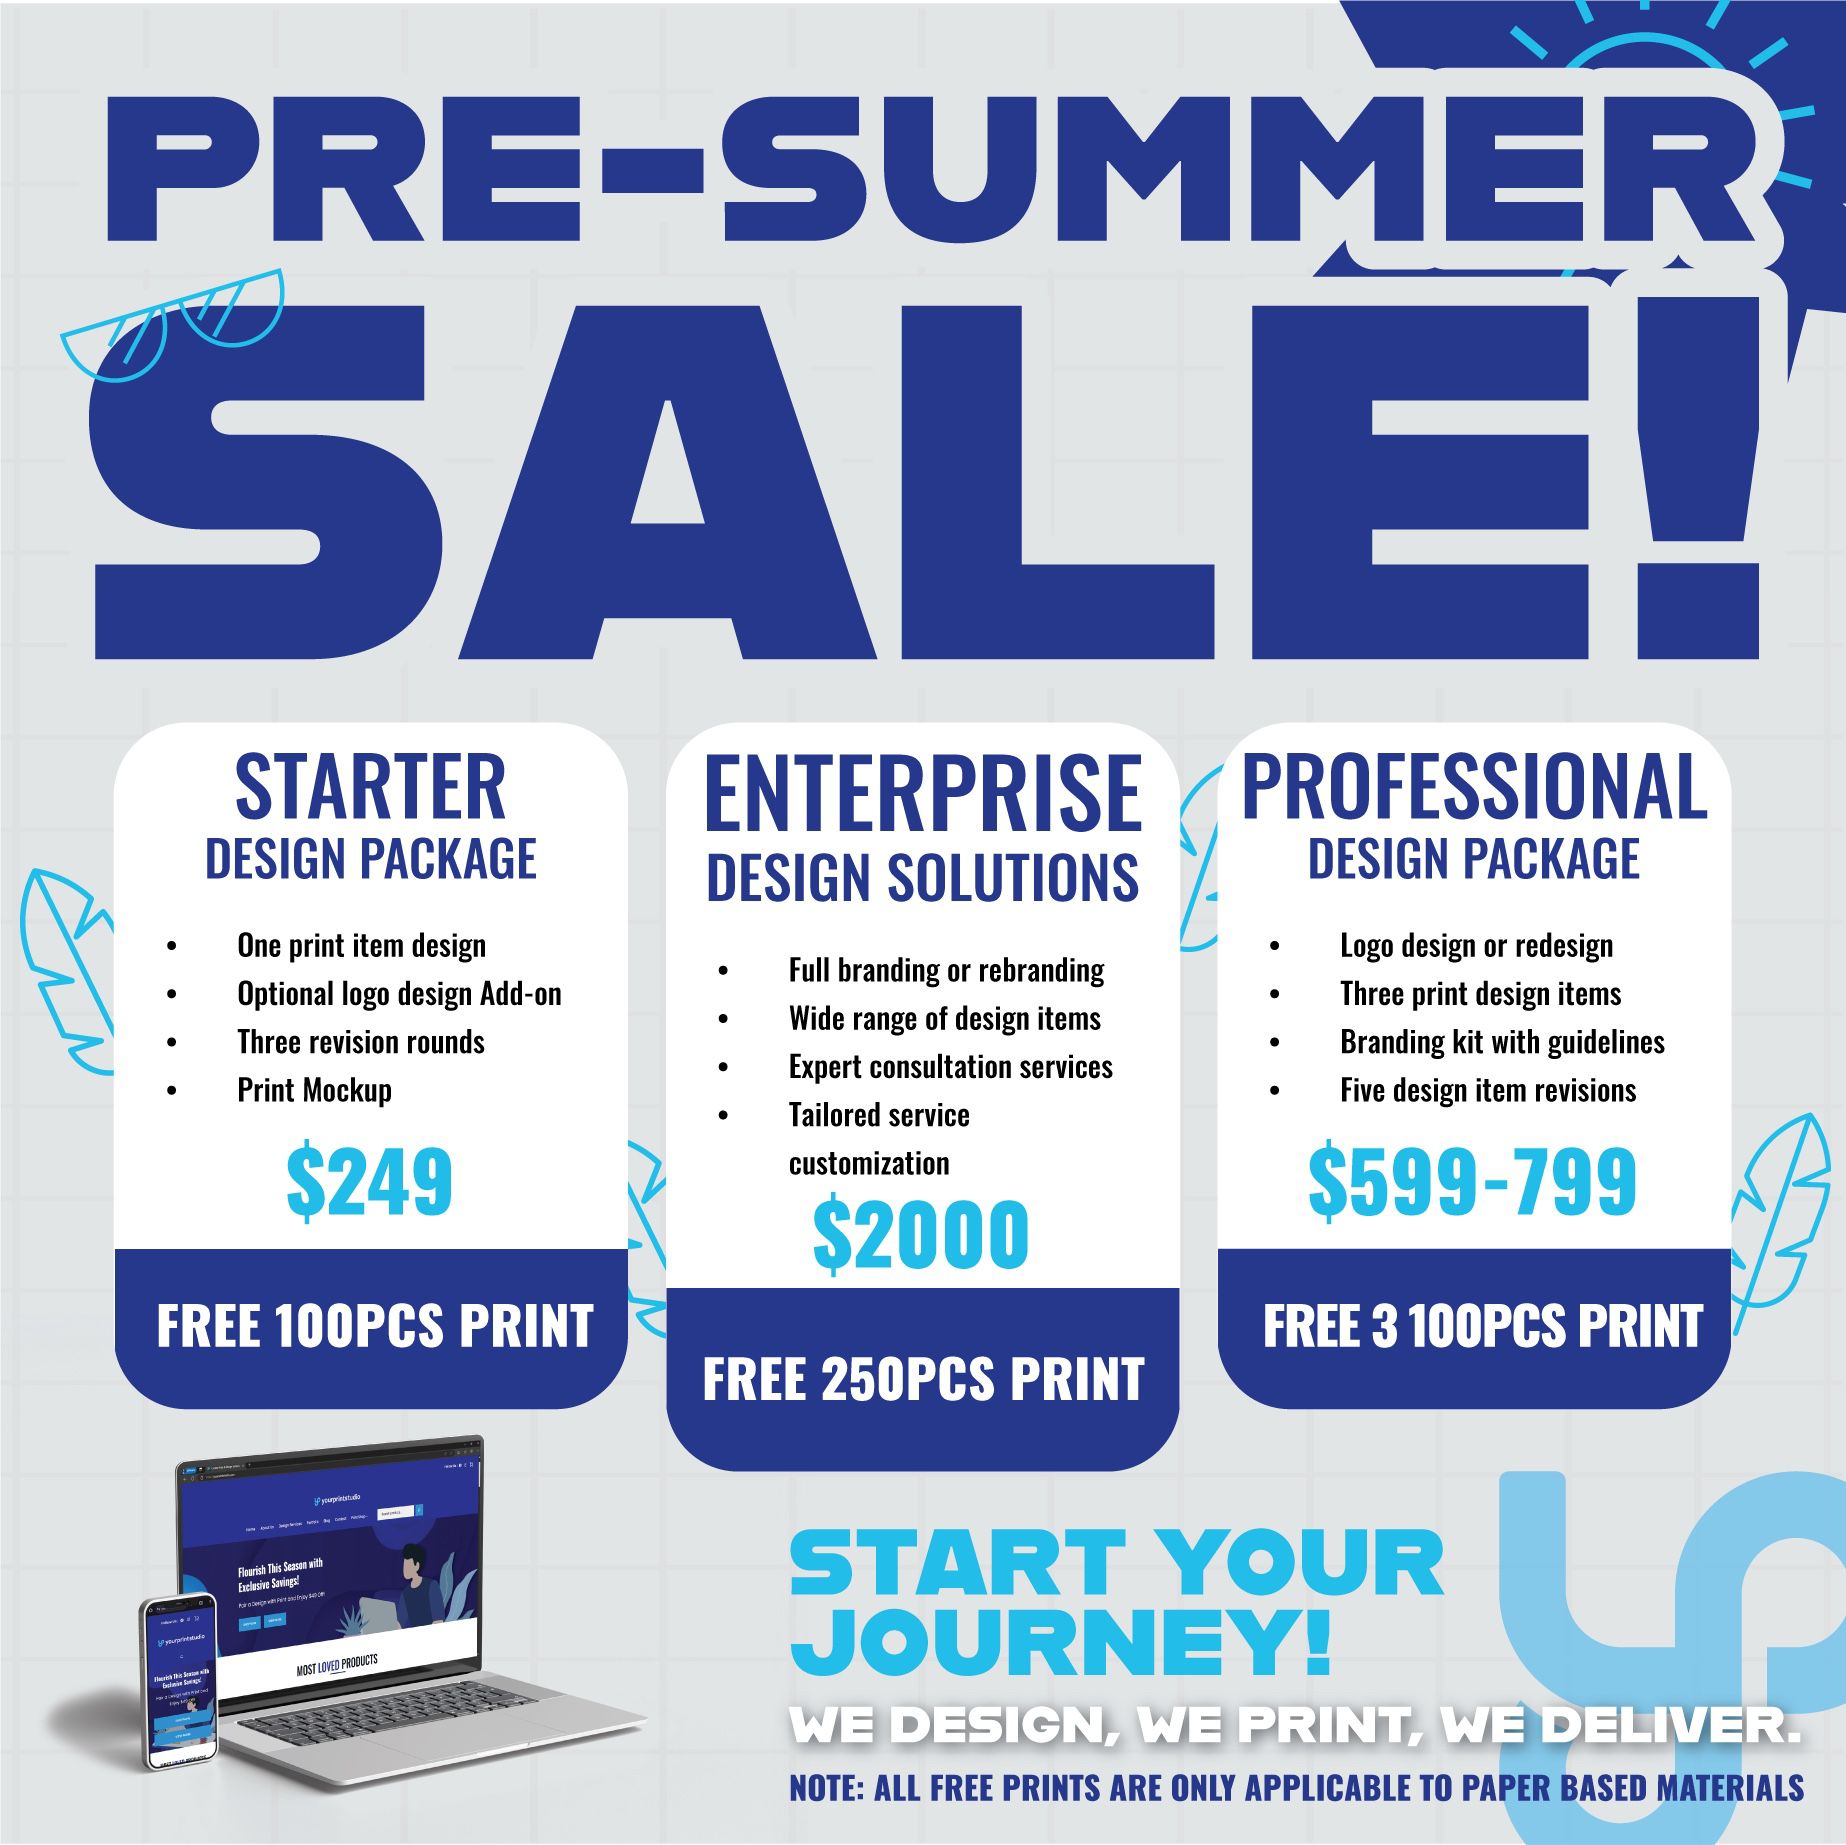 Pre-Summer Sale on Graphic Design Packages – Elevate Your Brand!